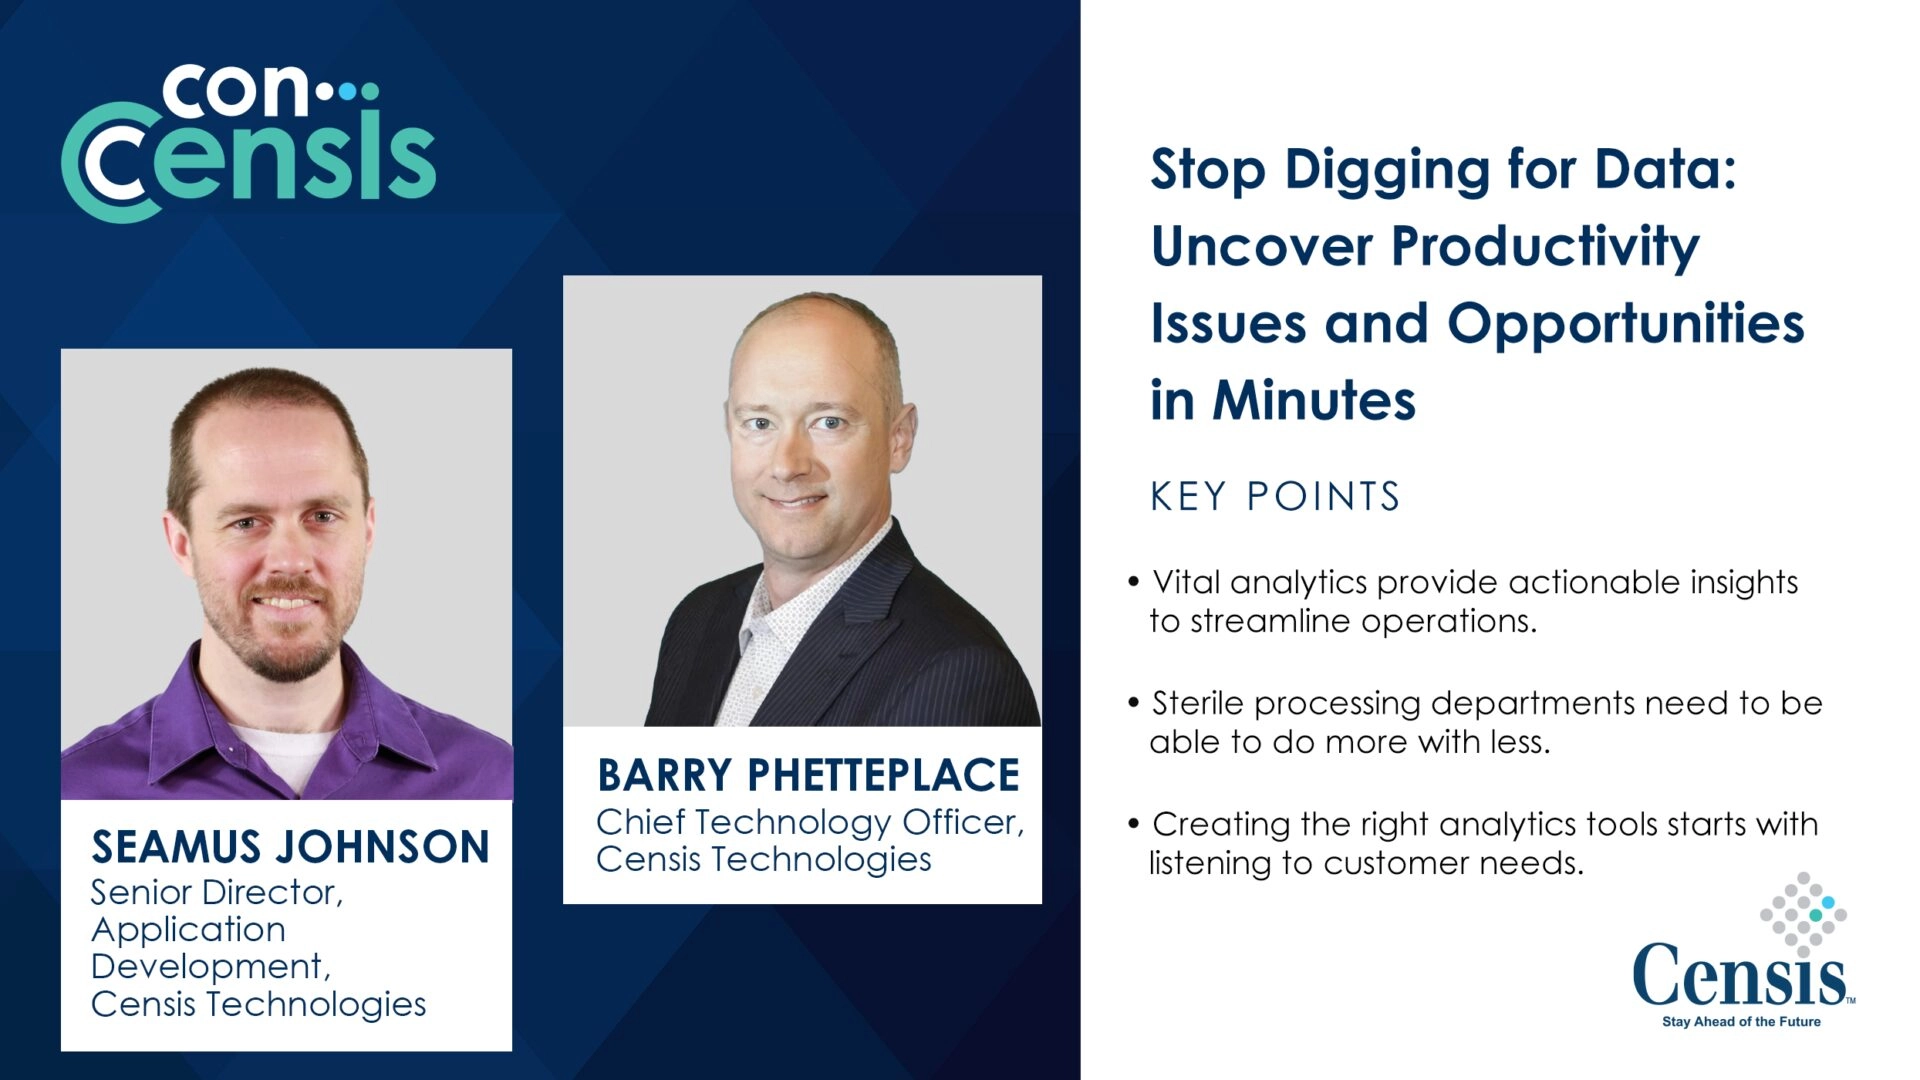 Stop Digging for Data: Uncover Productivity Issues and Opportunities in Minutes